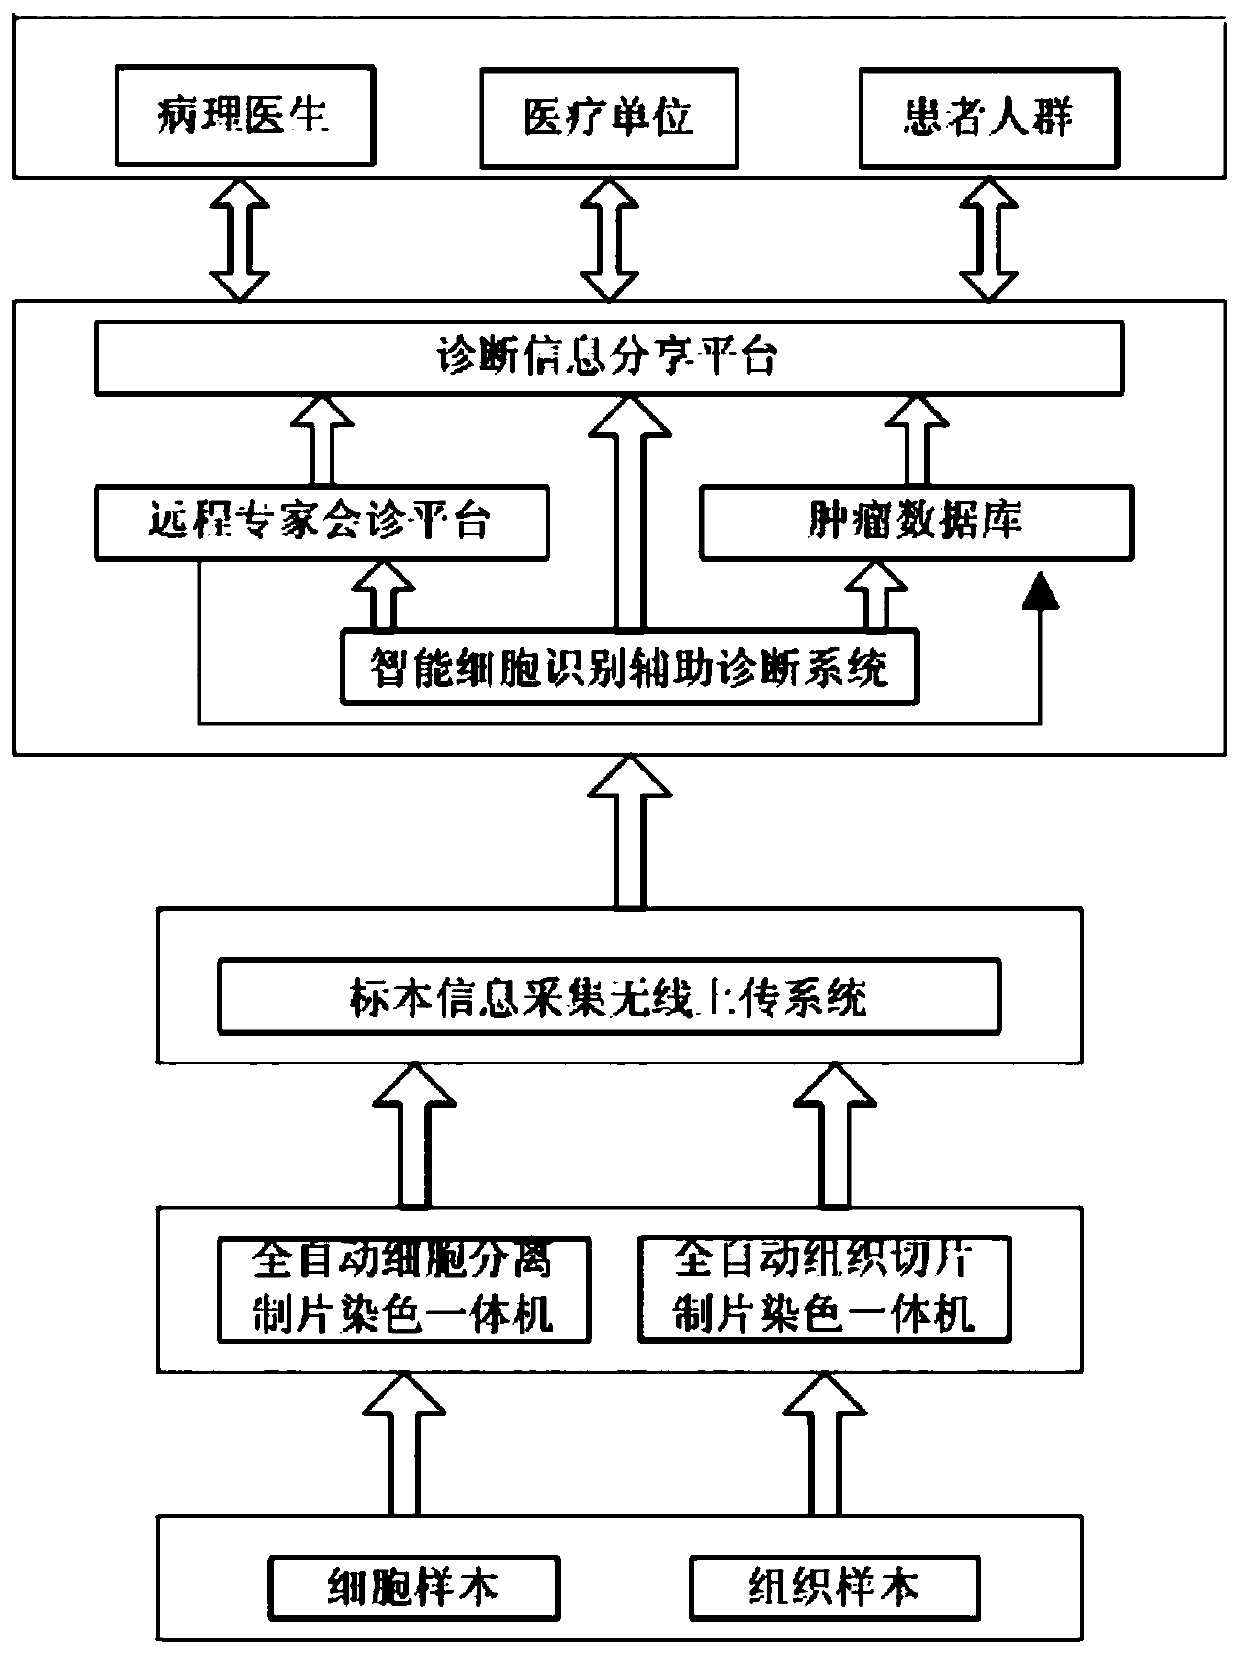 Intelligent pathological diagnosis method and system thereof